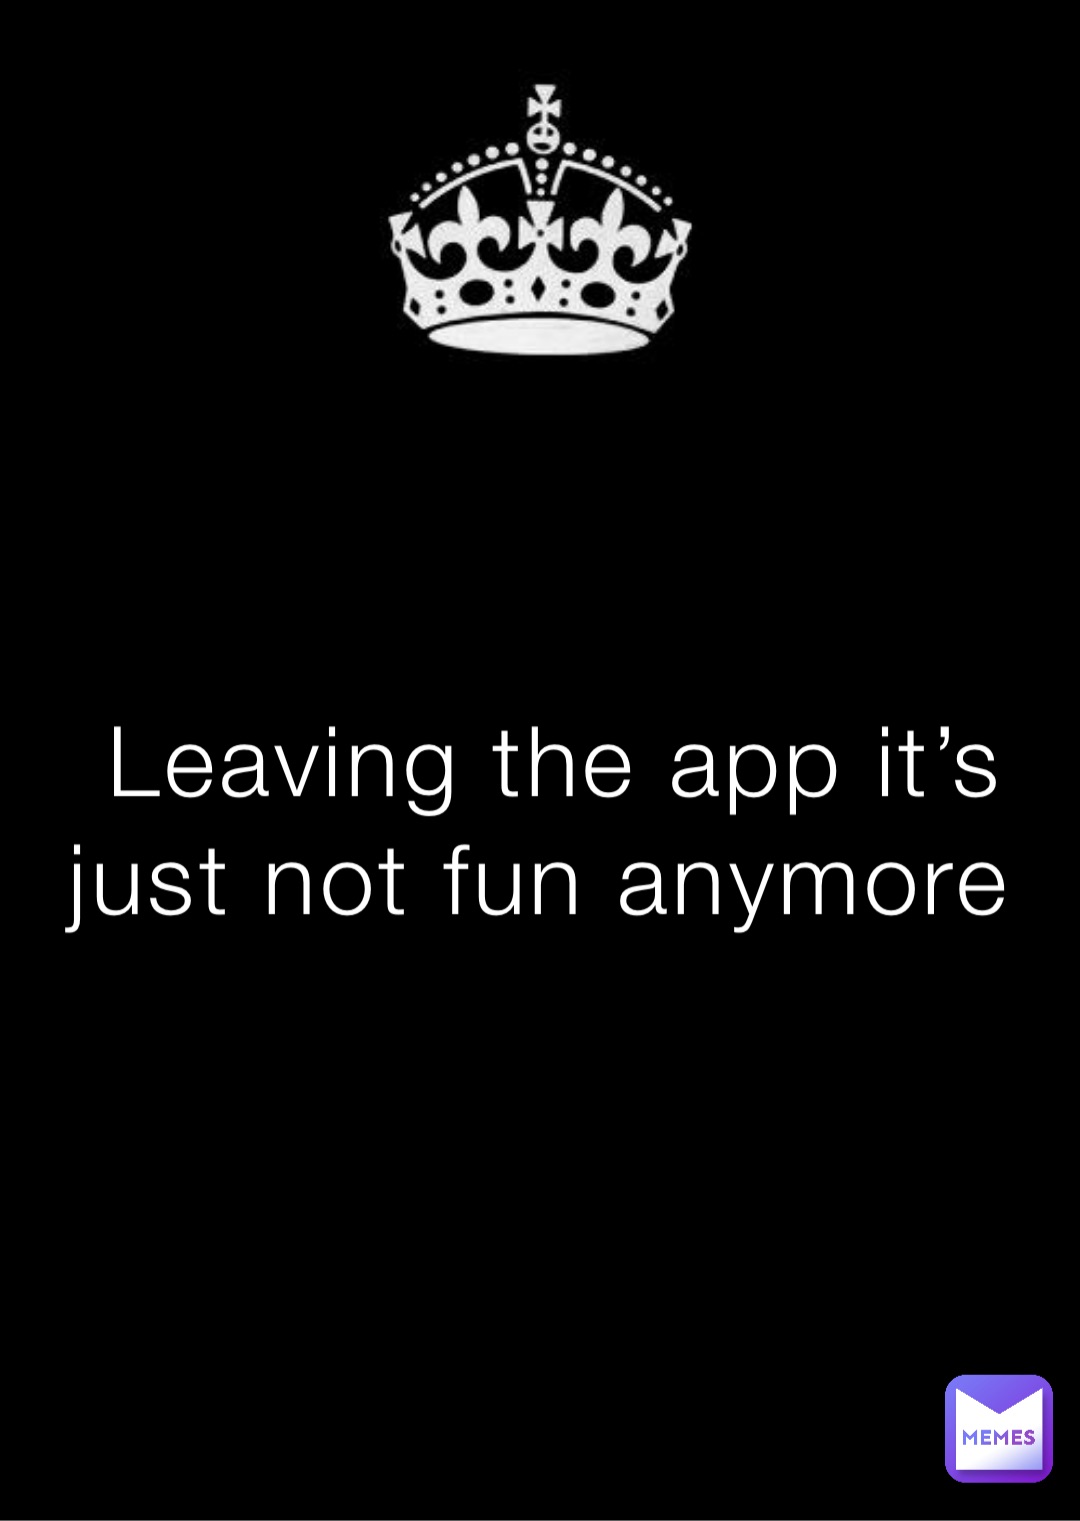 Leaving the app it’s just not fun anymore